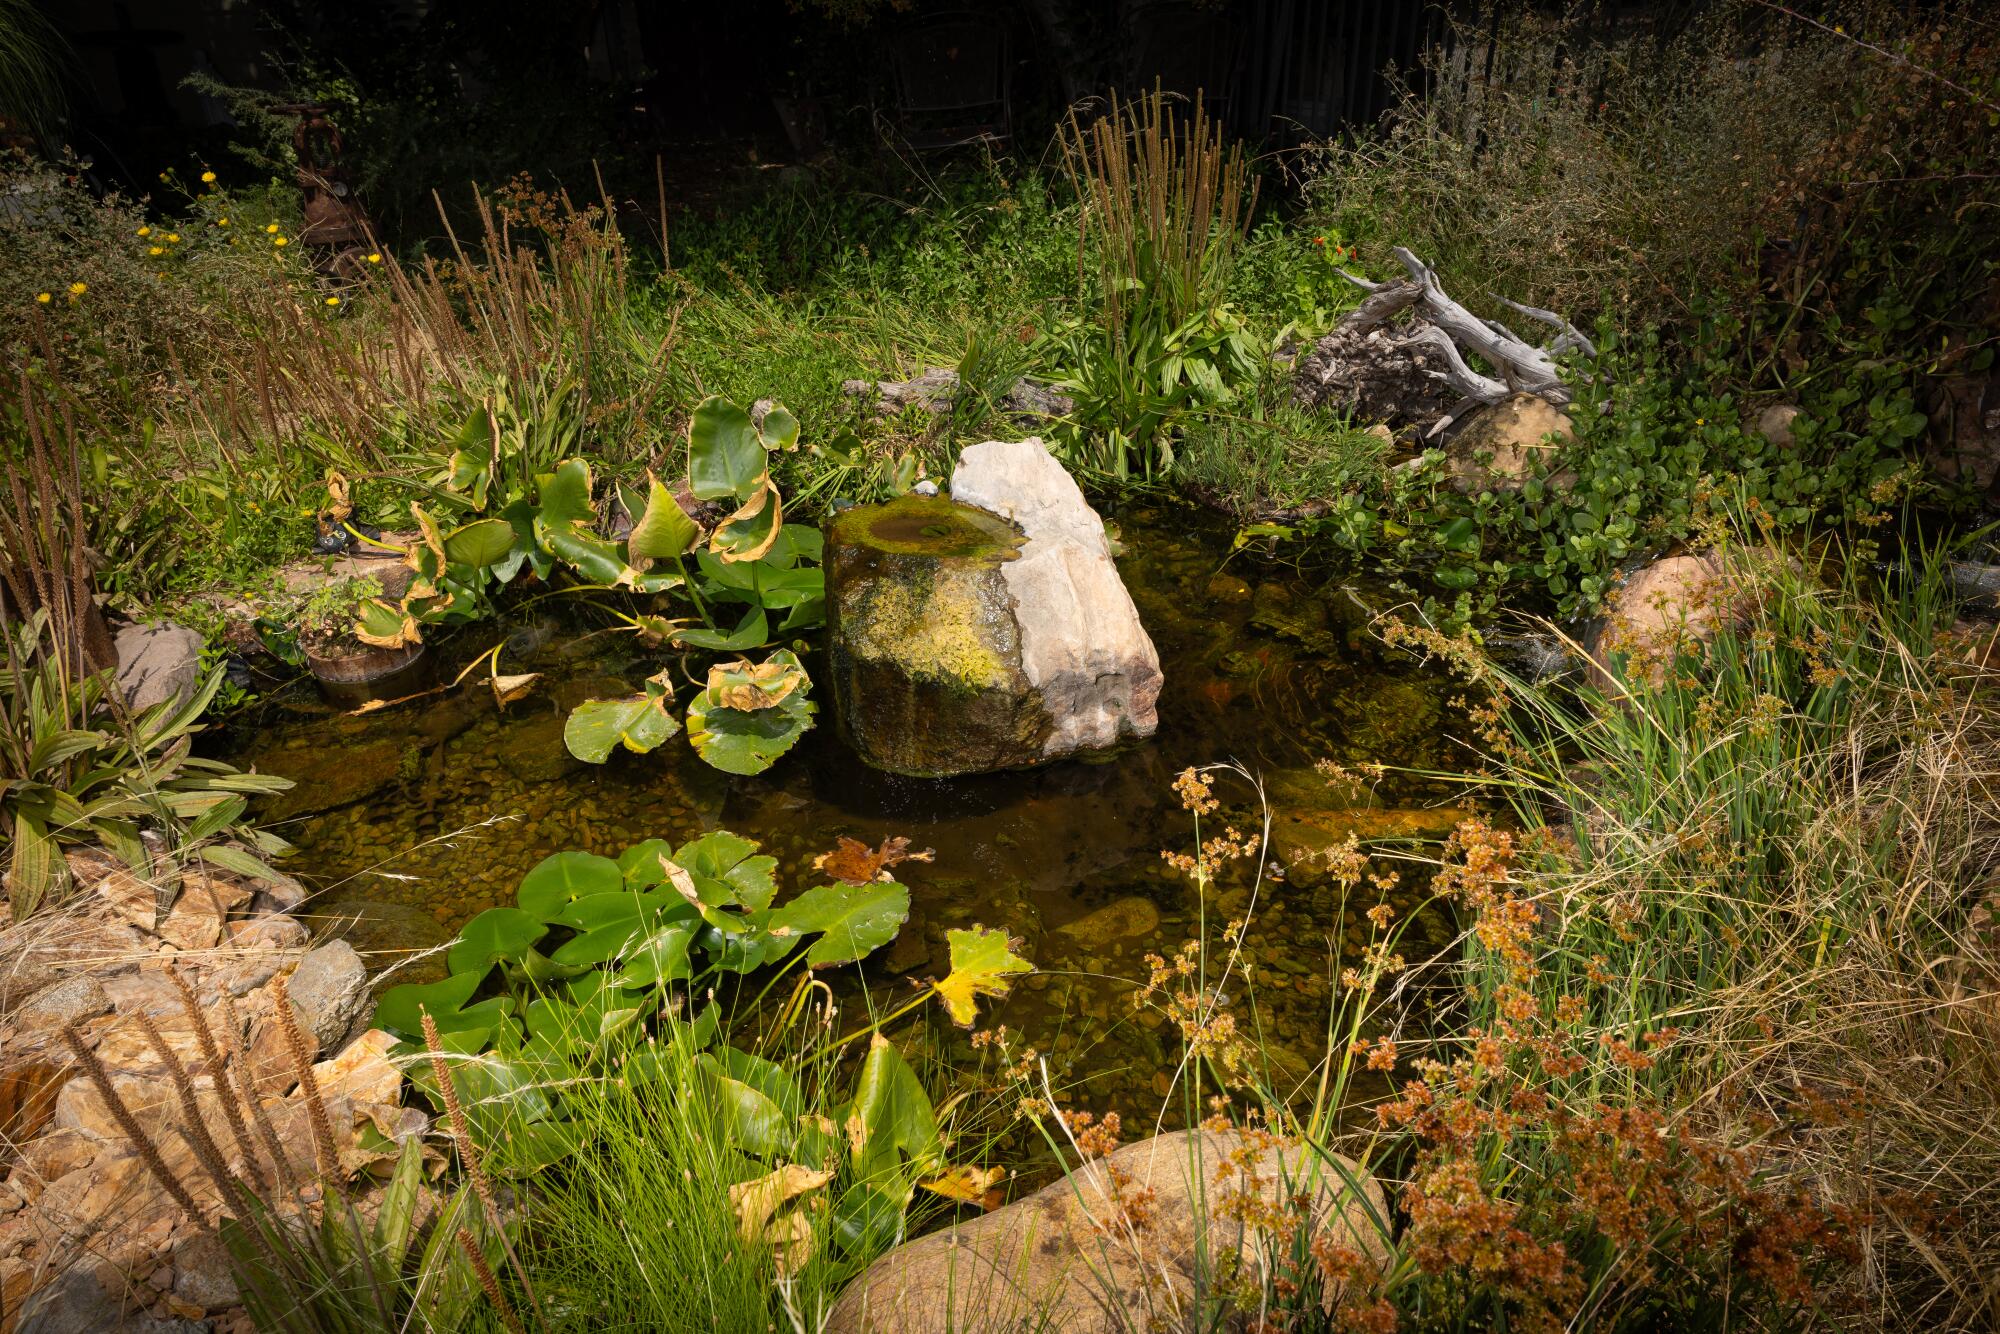 A small pond with water lilies, surrounded by boulders and native plants.